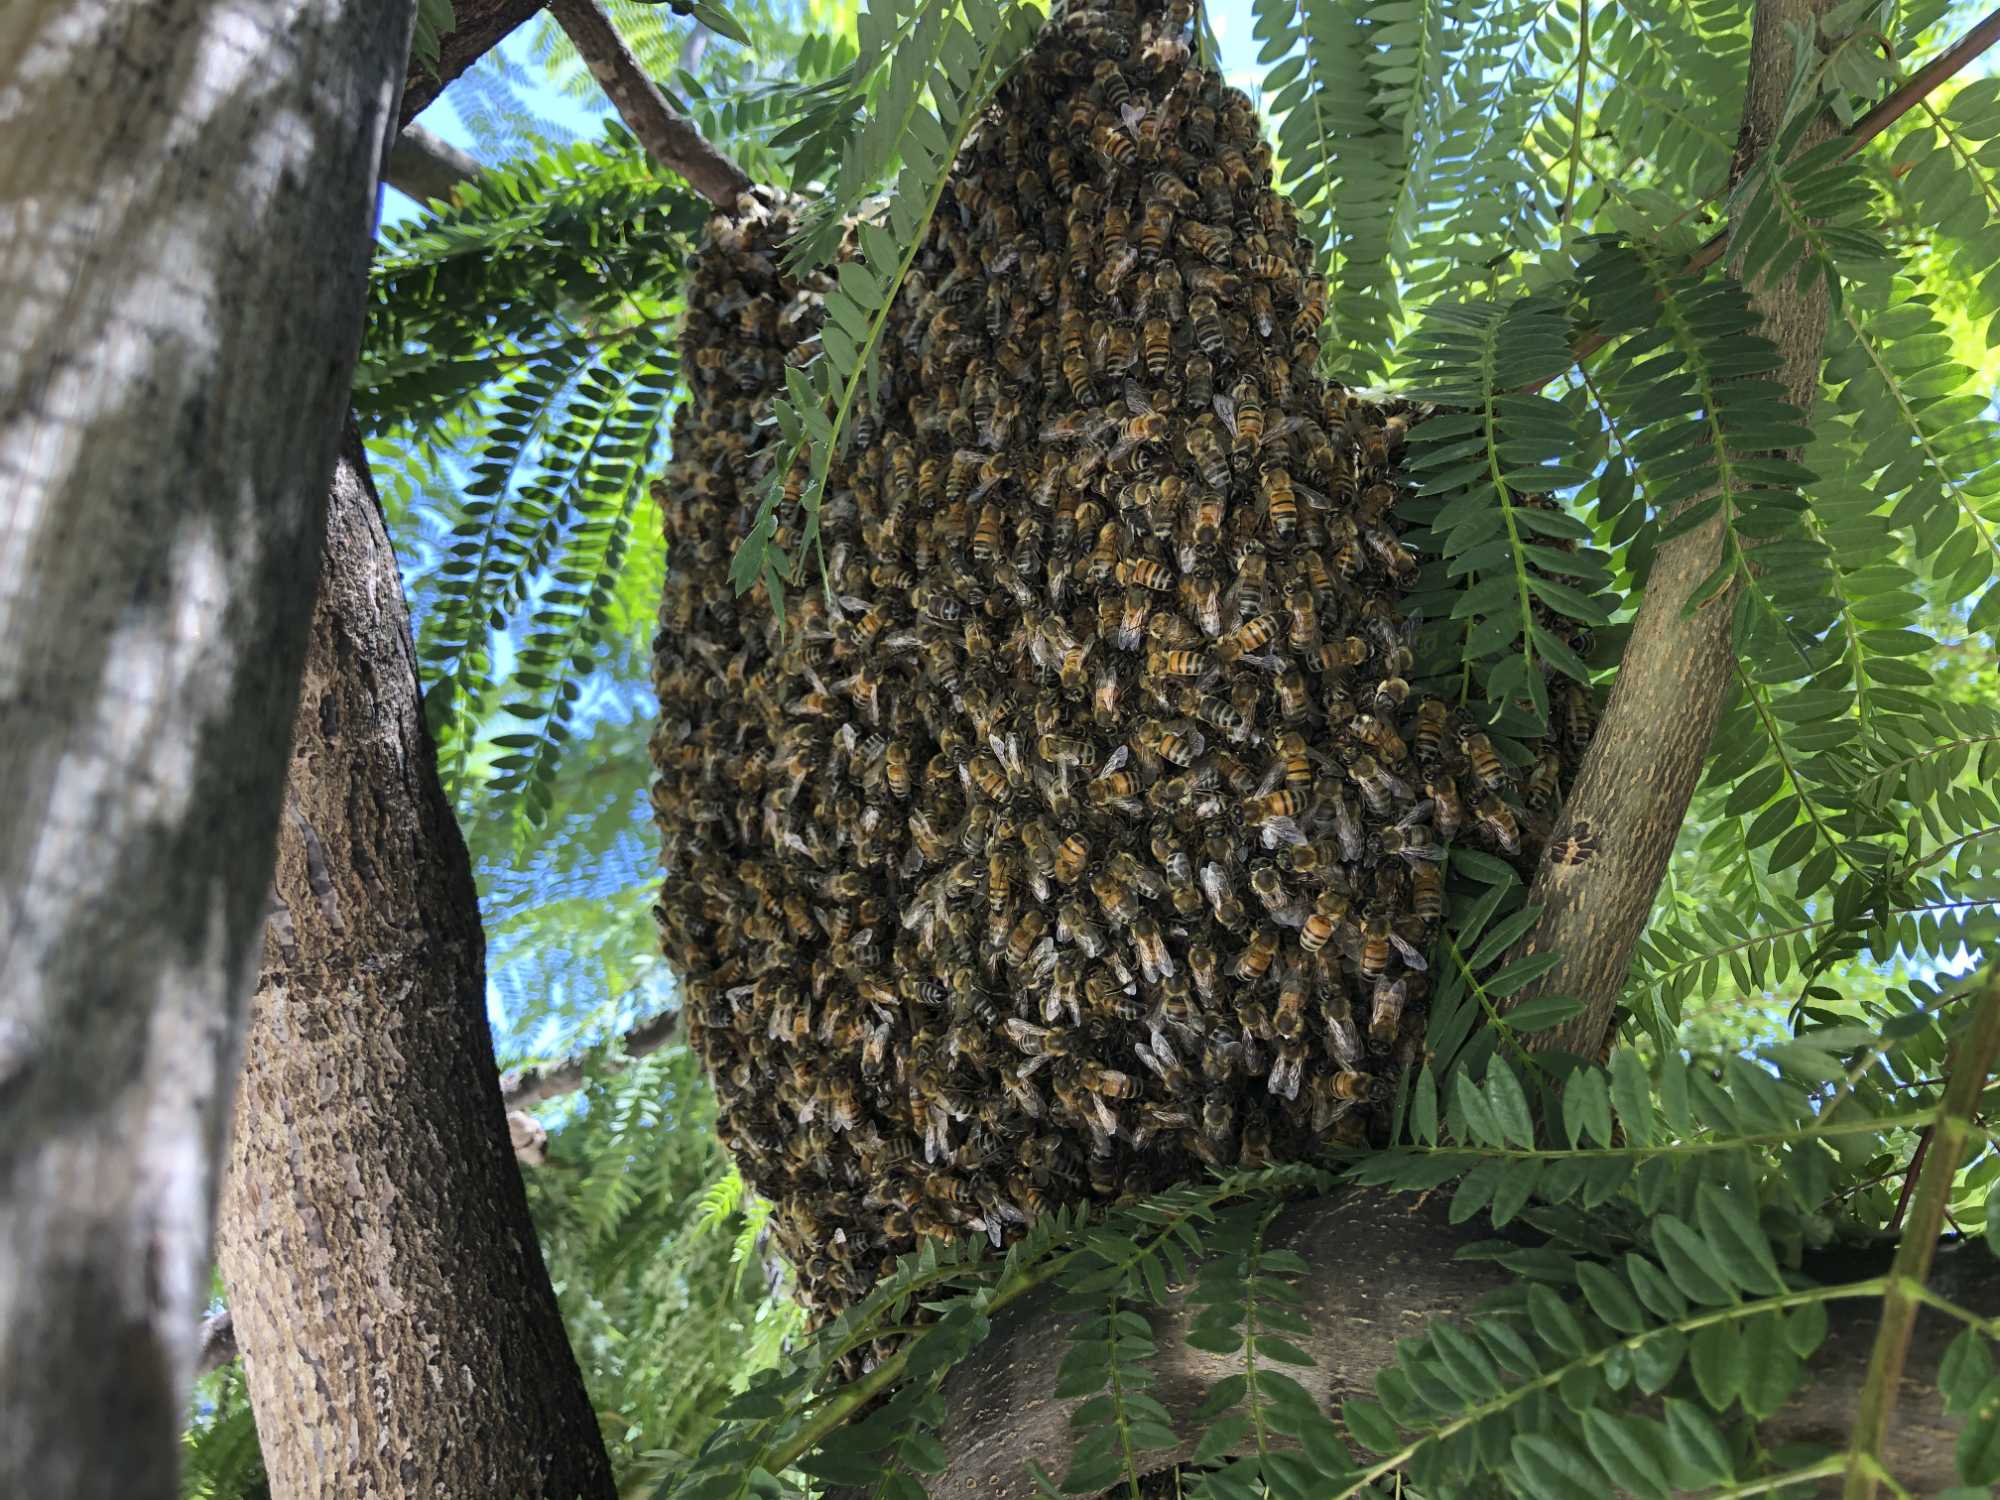 Large Bee Swarm in a tree